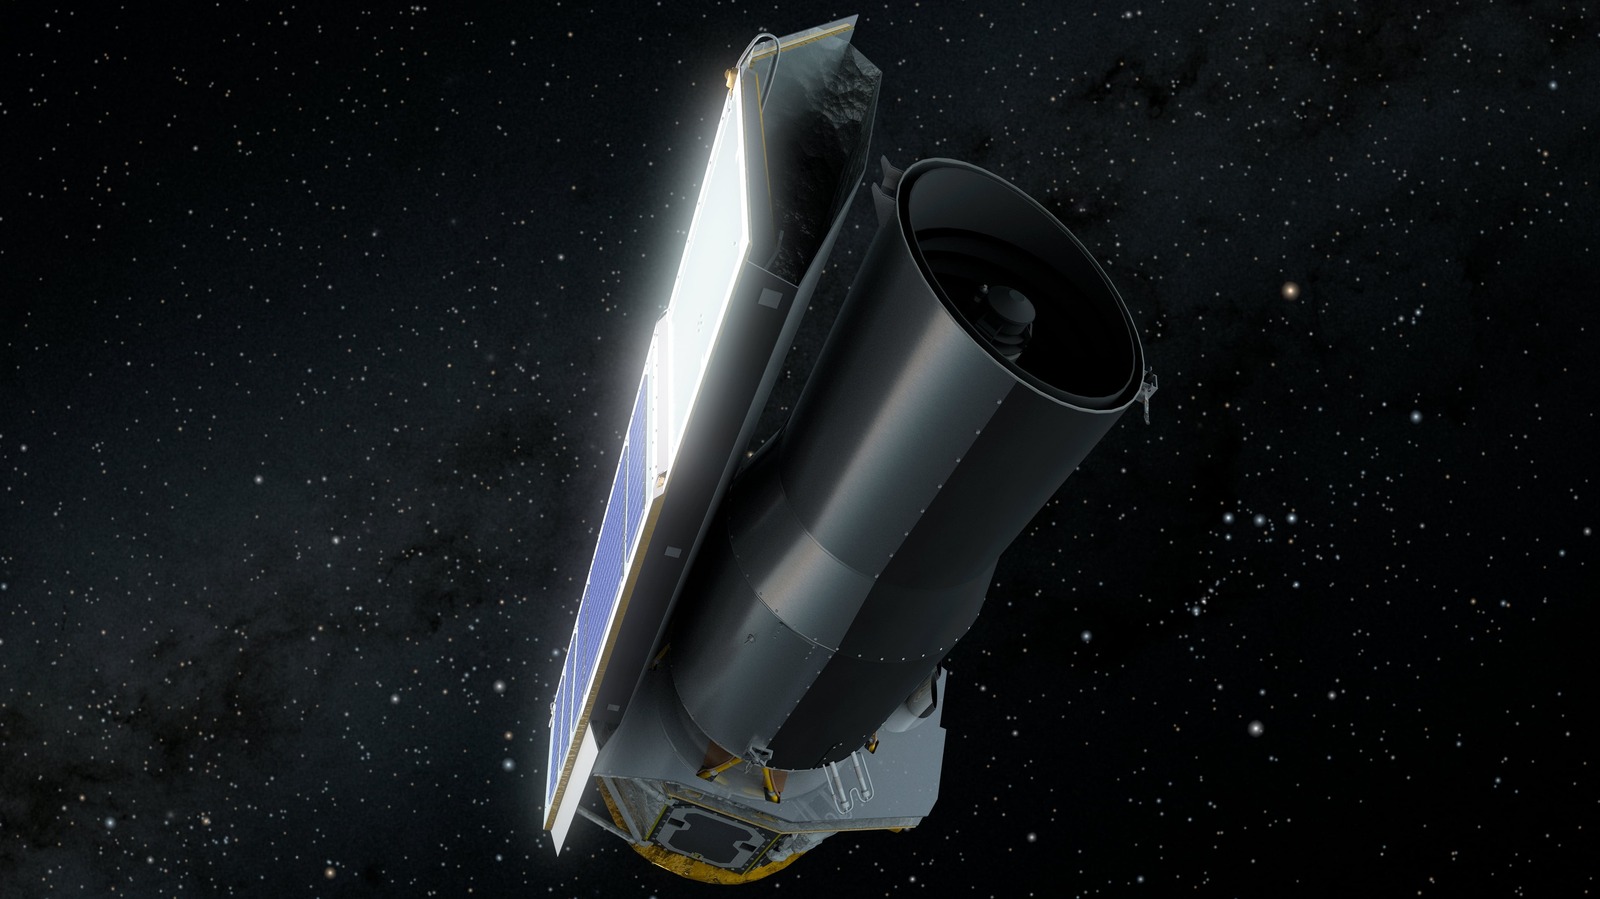 Whatever Happened To The Spitzer Space Telescope? thumbnail